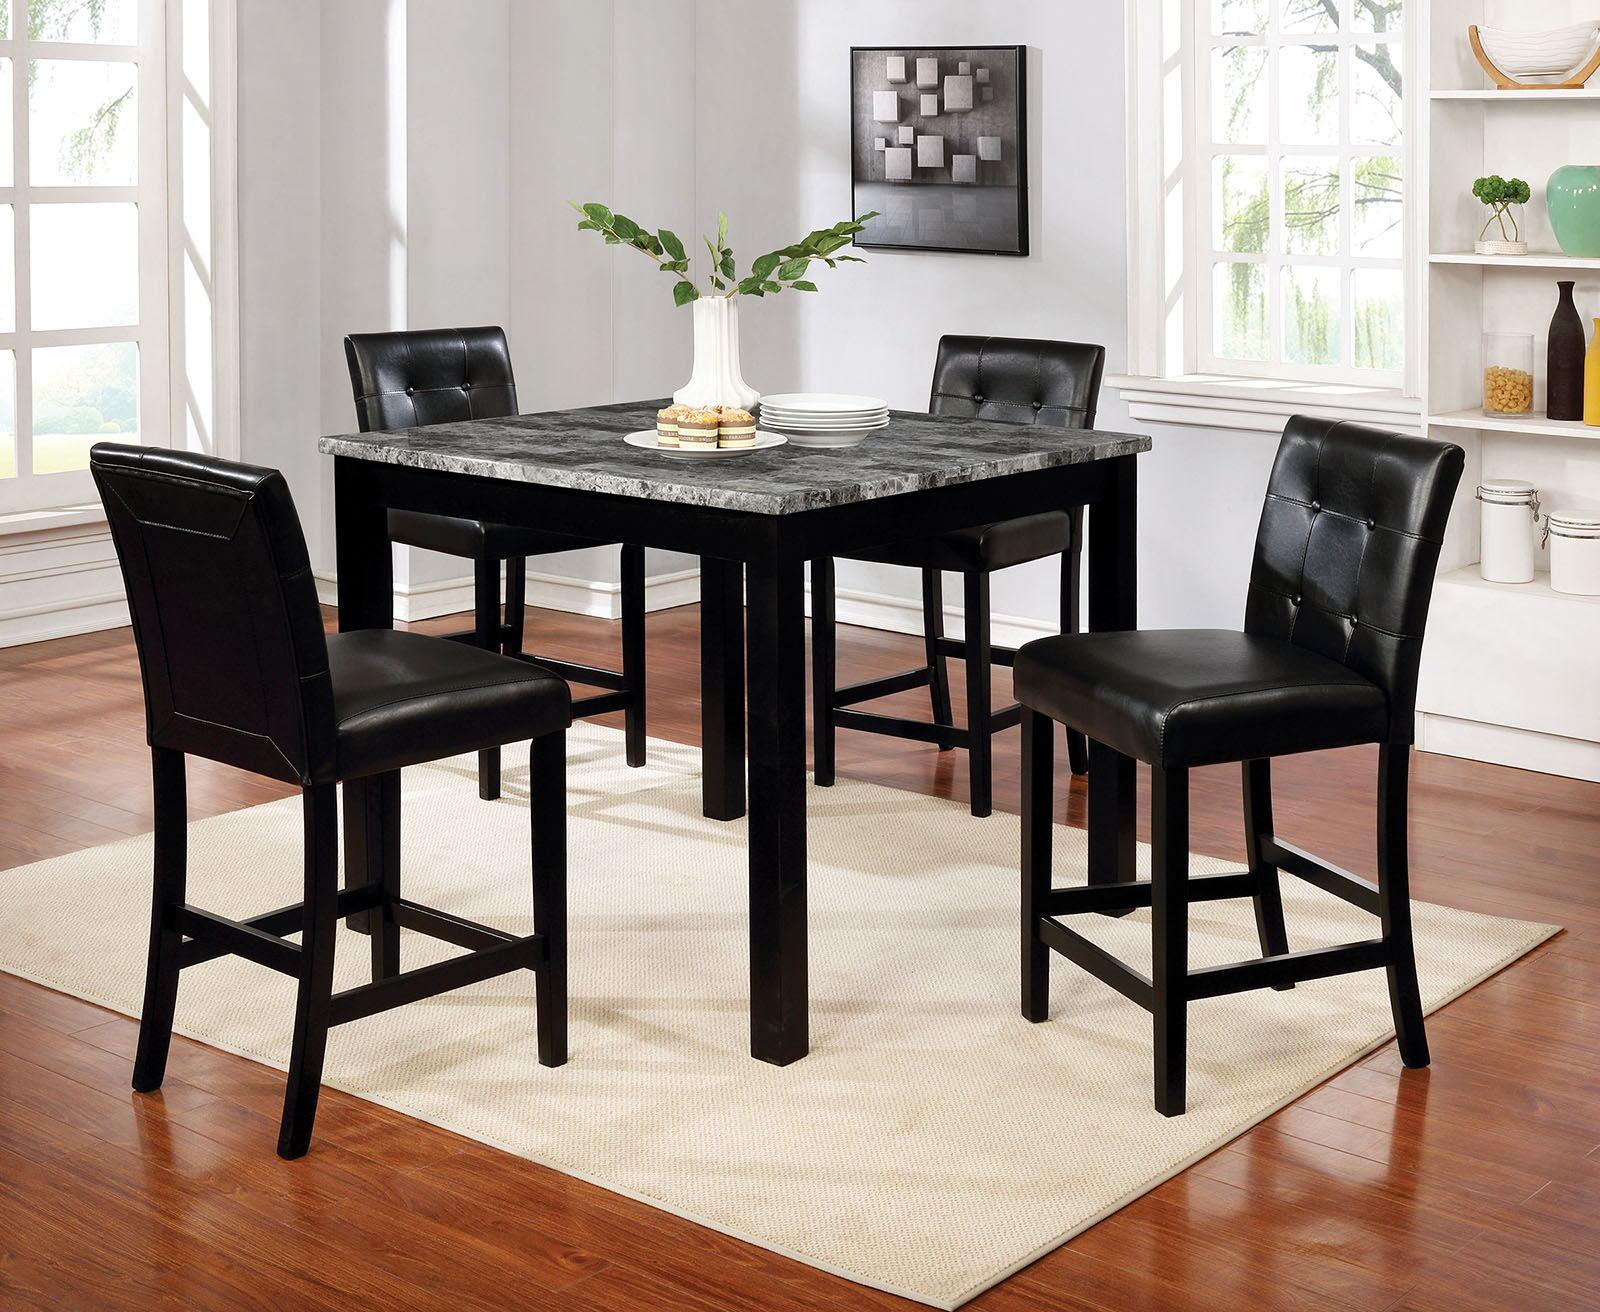 Furniture of America - Wildrose - 5 Piece Counter Height Table Set - Gray / Black - 5th Avenue Furniture